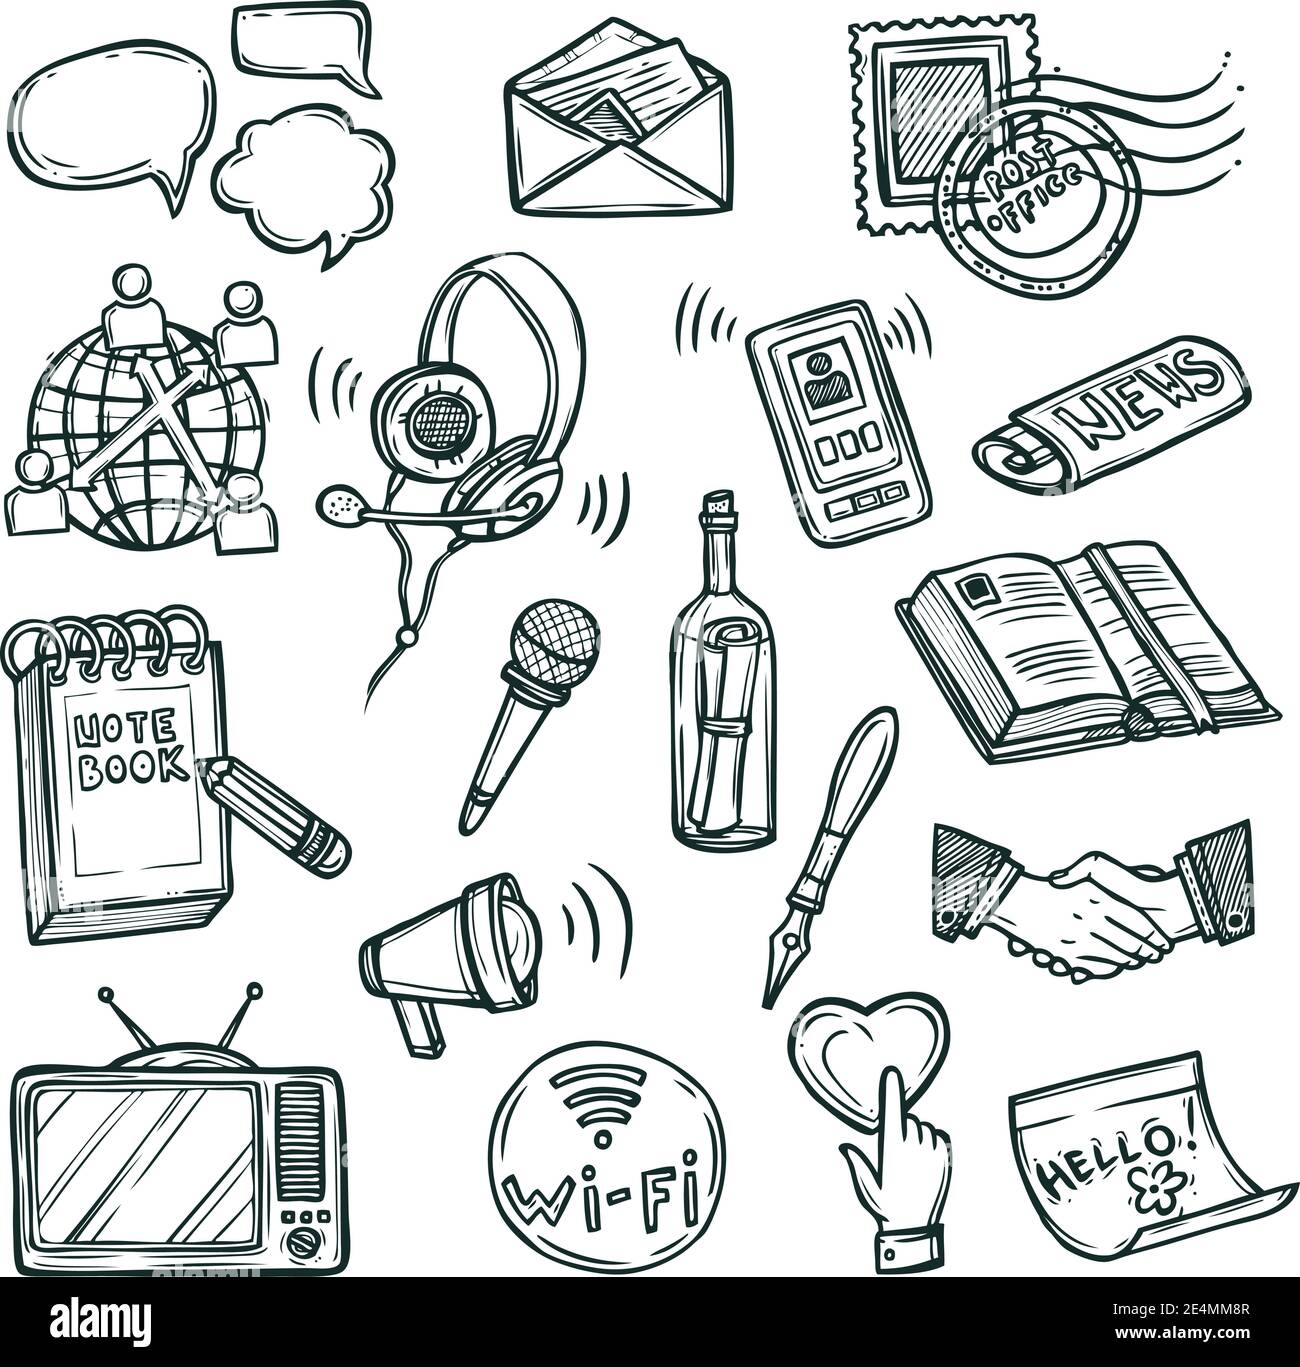 communication doodle decorative icon set with mobile phone notebook handshake symbols isolated vector illustration Stock Vector